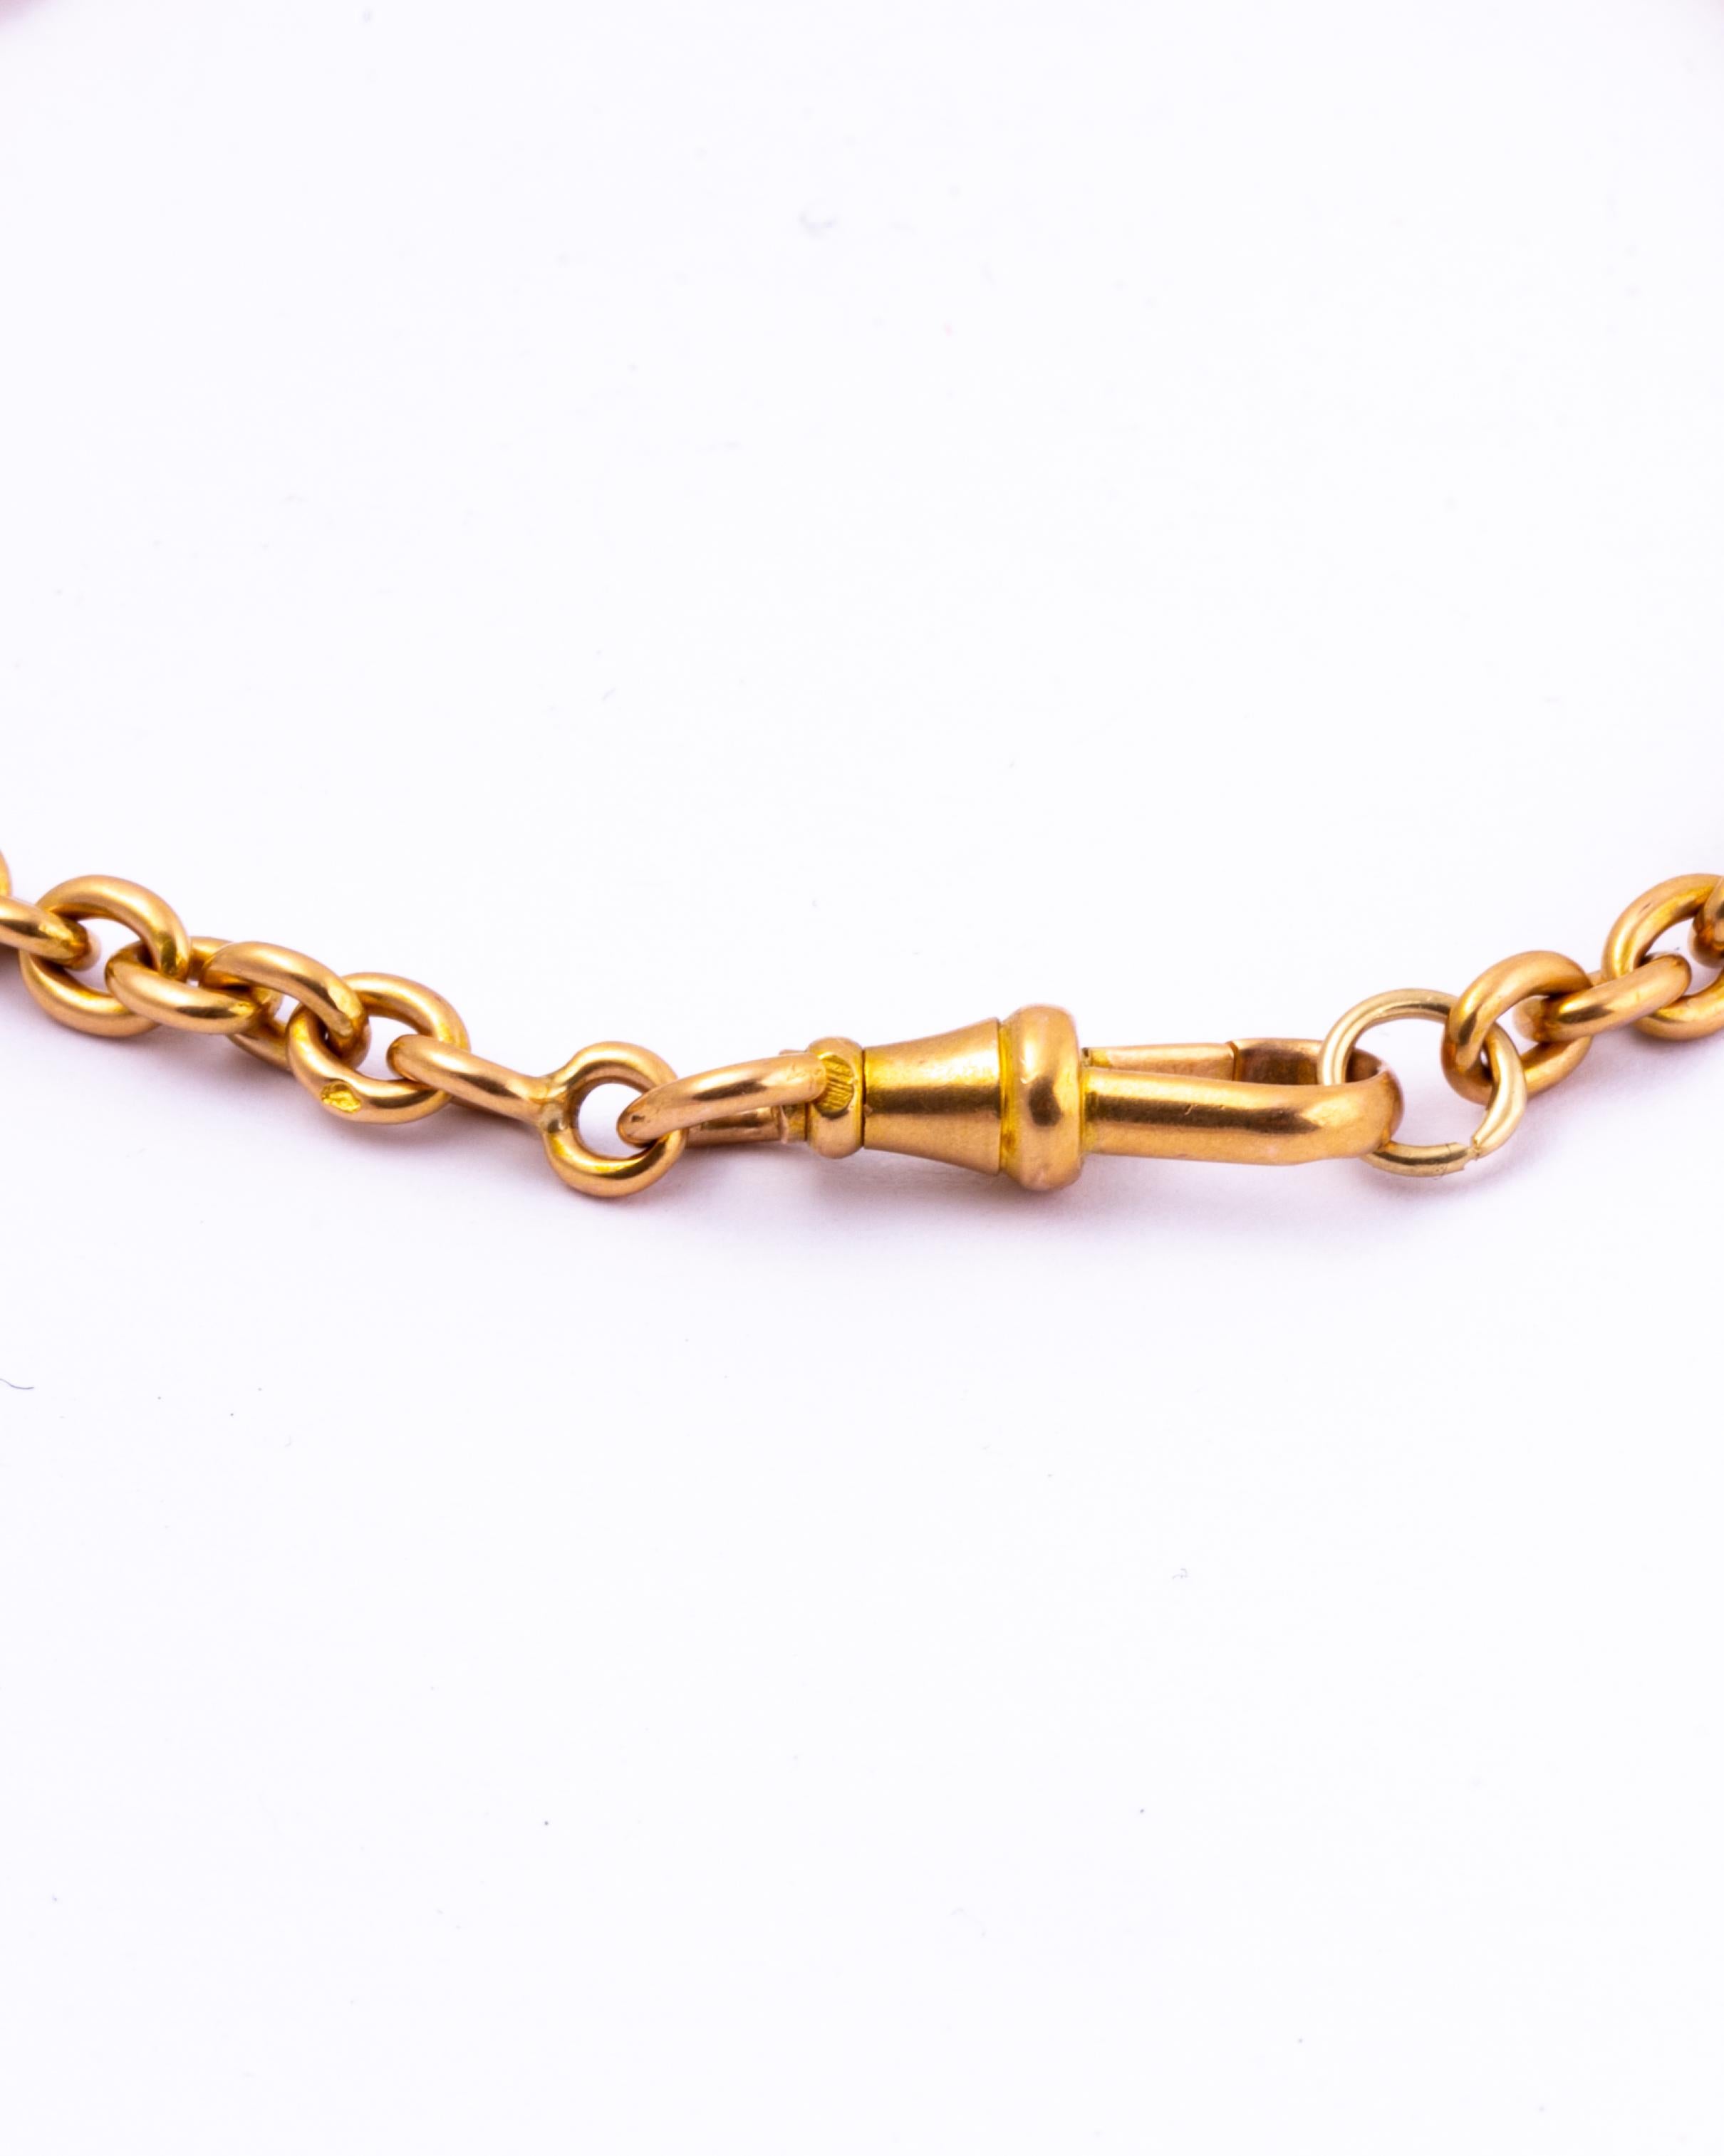 This lovely bracelet is made up of simple links and is fastened with a dog clip. Modelled out of 18ct gold and made in England.

Bracelet Length: 21.5cm
Chain Width: 4mm

Weight: 15g